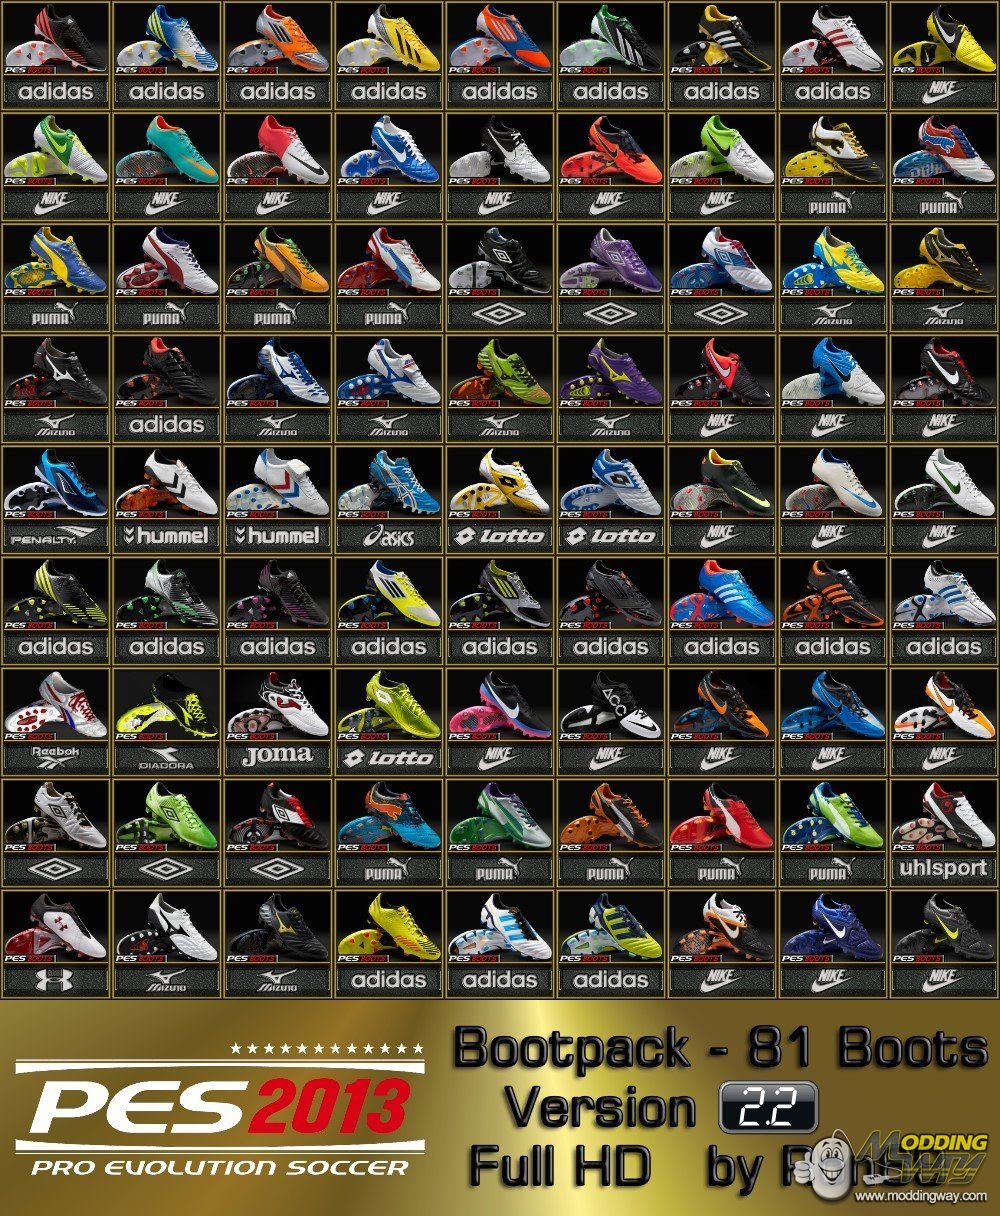 PES 2013 Bootpack by Ron69 - Pro Evolution Soccer 2013